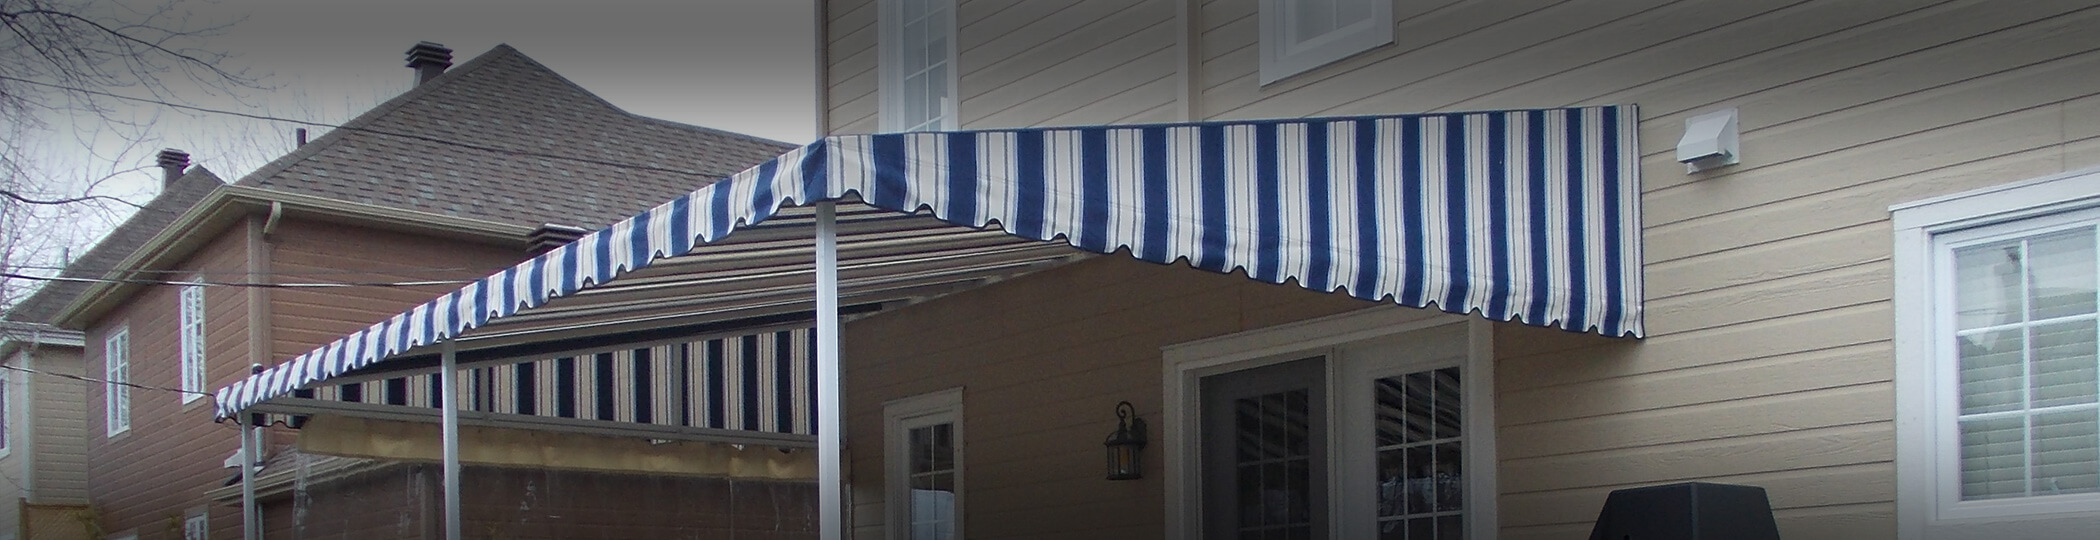 Residential stationary awnings at Auvents Valleyfield